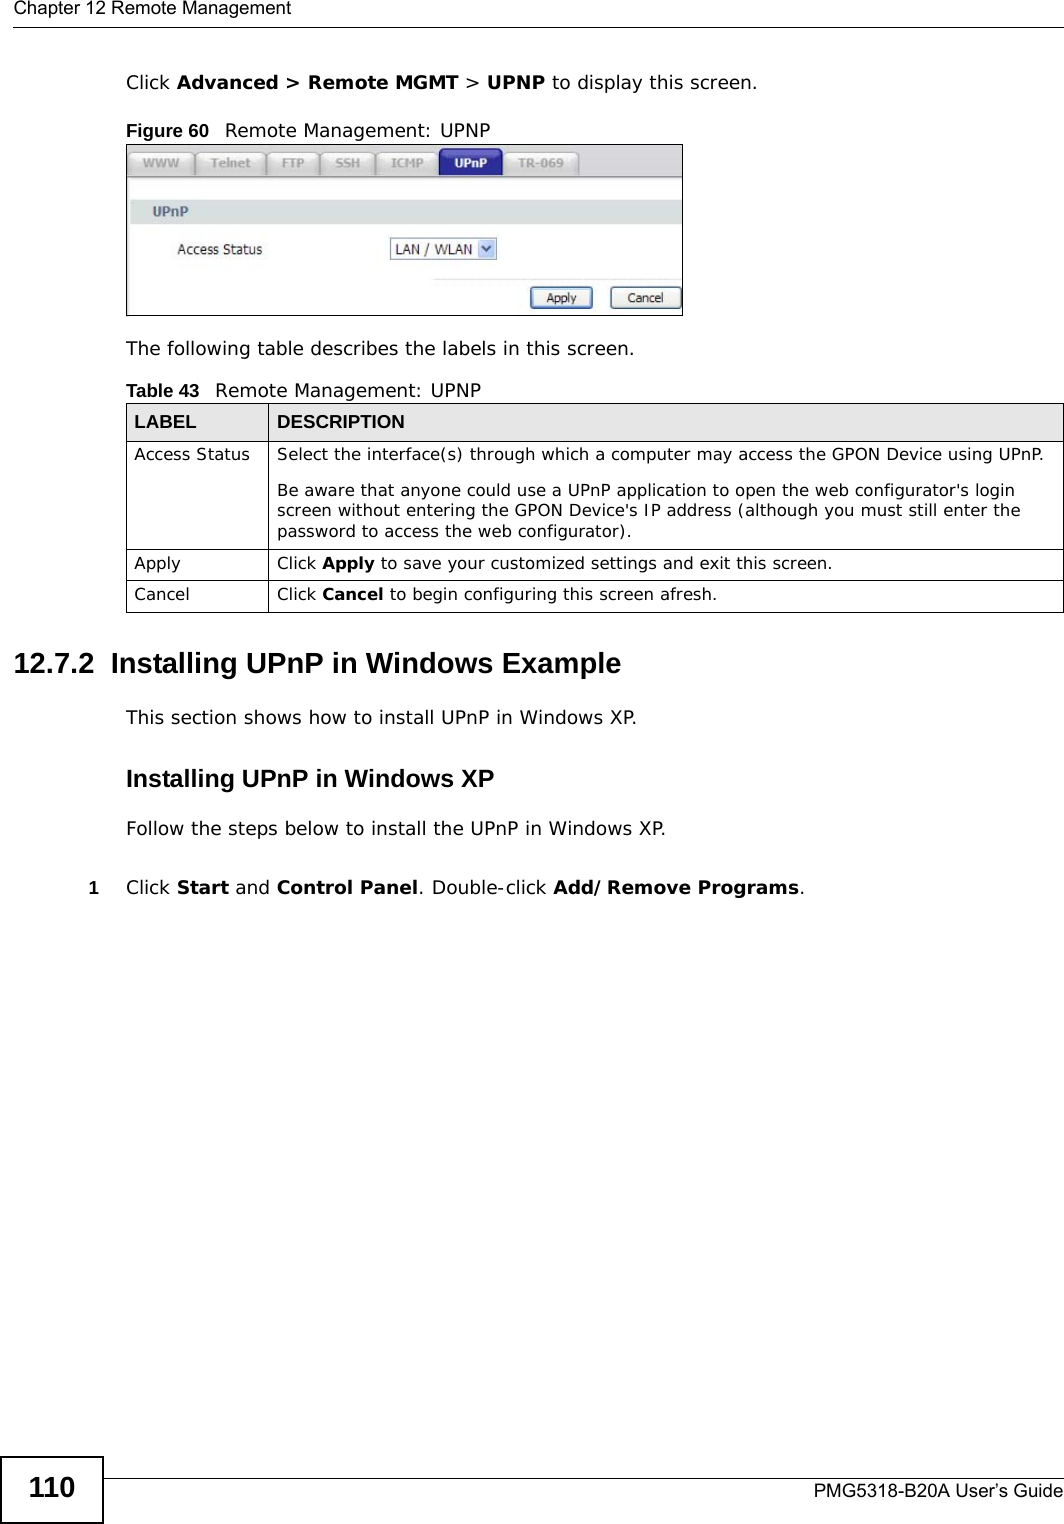 Chapter 12 Remote ManagementPMG5318-B20A User’s Guide110Click Advanced &gt; Remote MGMT &gt; UPNP to display this screen.Figure 60   Remote Management: UPNP The following table describes the labels in this screen.12.7.2  Installing UPnP in Windows ExampleThis section shows how to install UPnP in Windows XP. Installing UPnP in Windows XPFollow the steps below to install the UPnP in Windows XP. 1Click Start and Control Panel. Double-click Add/Remove Programs.Table 43   Remote Management: UPNP LABEL DESCRIPTIONAccess Status Select the interface(s) through which a computer may access the GPON Device using UPnP.Be aware that anyone could use a UPnP application to open the web configurator&apos;s login screen without entering the GPON Device&apos;s IP address (although you must still enter the password to access the web configurator).Apply Click Apply to save your customized settings and exit this screen. Cancel Click Cancel to begin configuring this screen afresh.